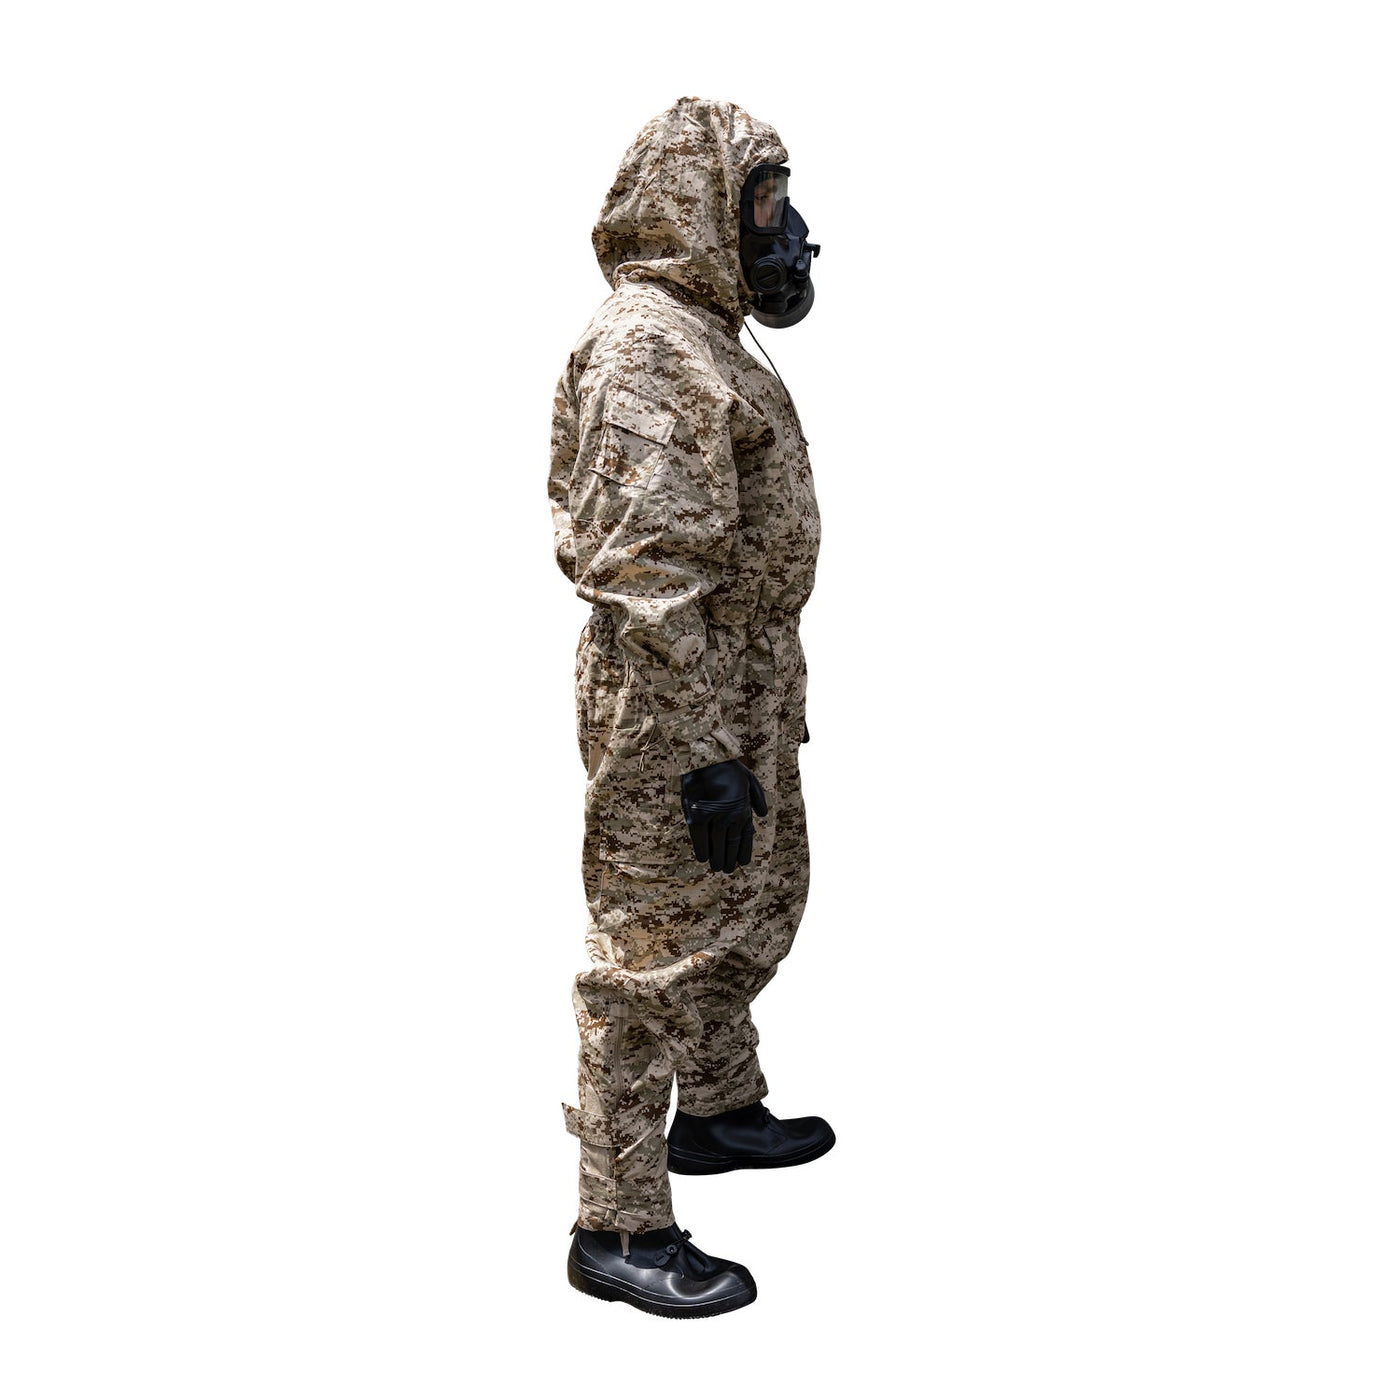 MIRA Safety MOPP-1 CBRN Protective Suit